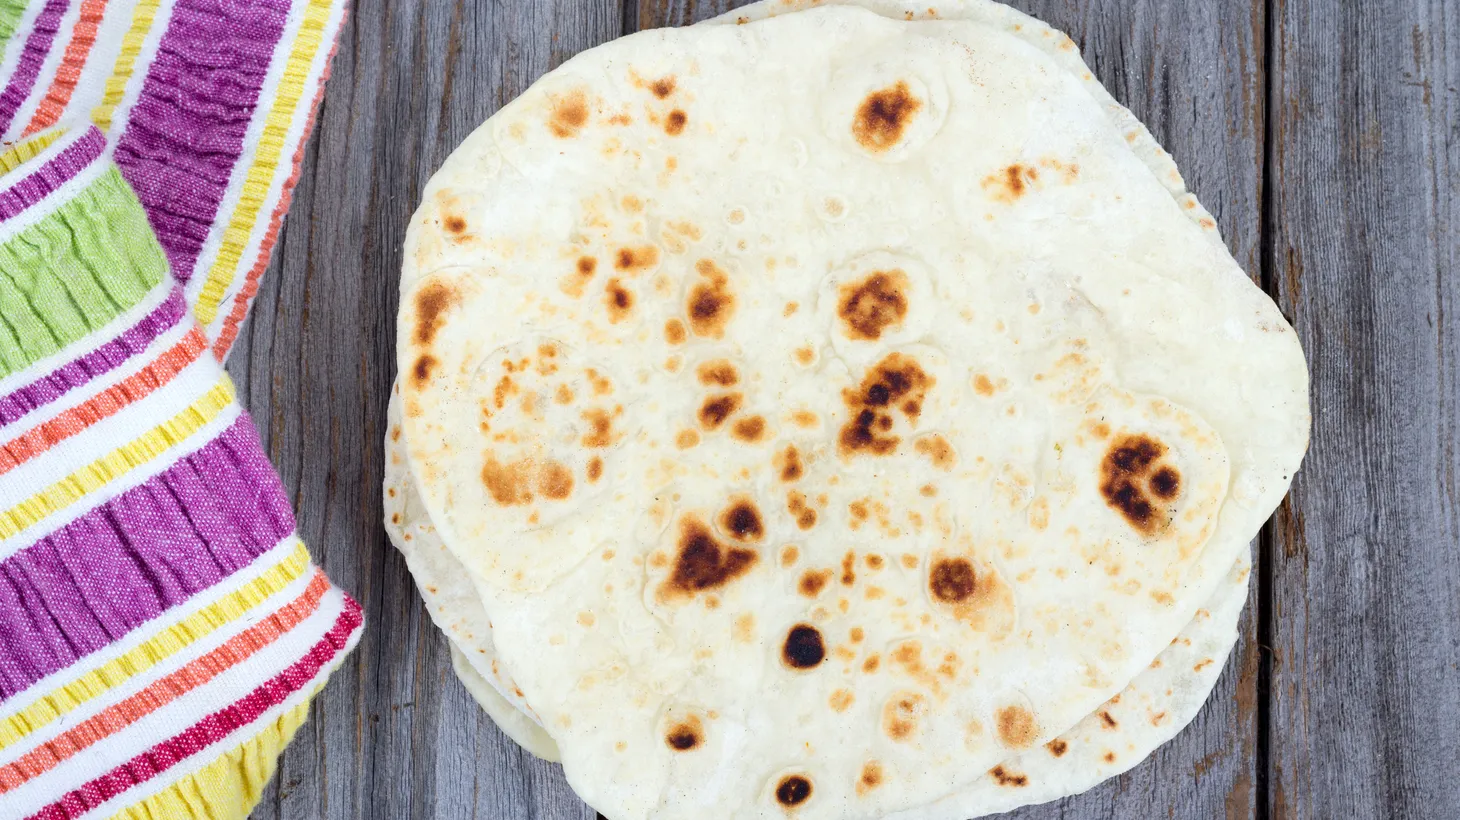 “If we’ve learned anything from this #TortillaTournament over the past five years, it’s that tortillas are everywhere,” says Gustavo Arellano. Photo by Shutterstock.